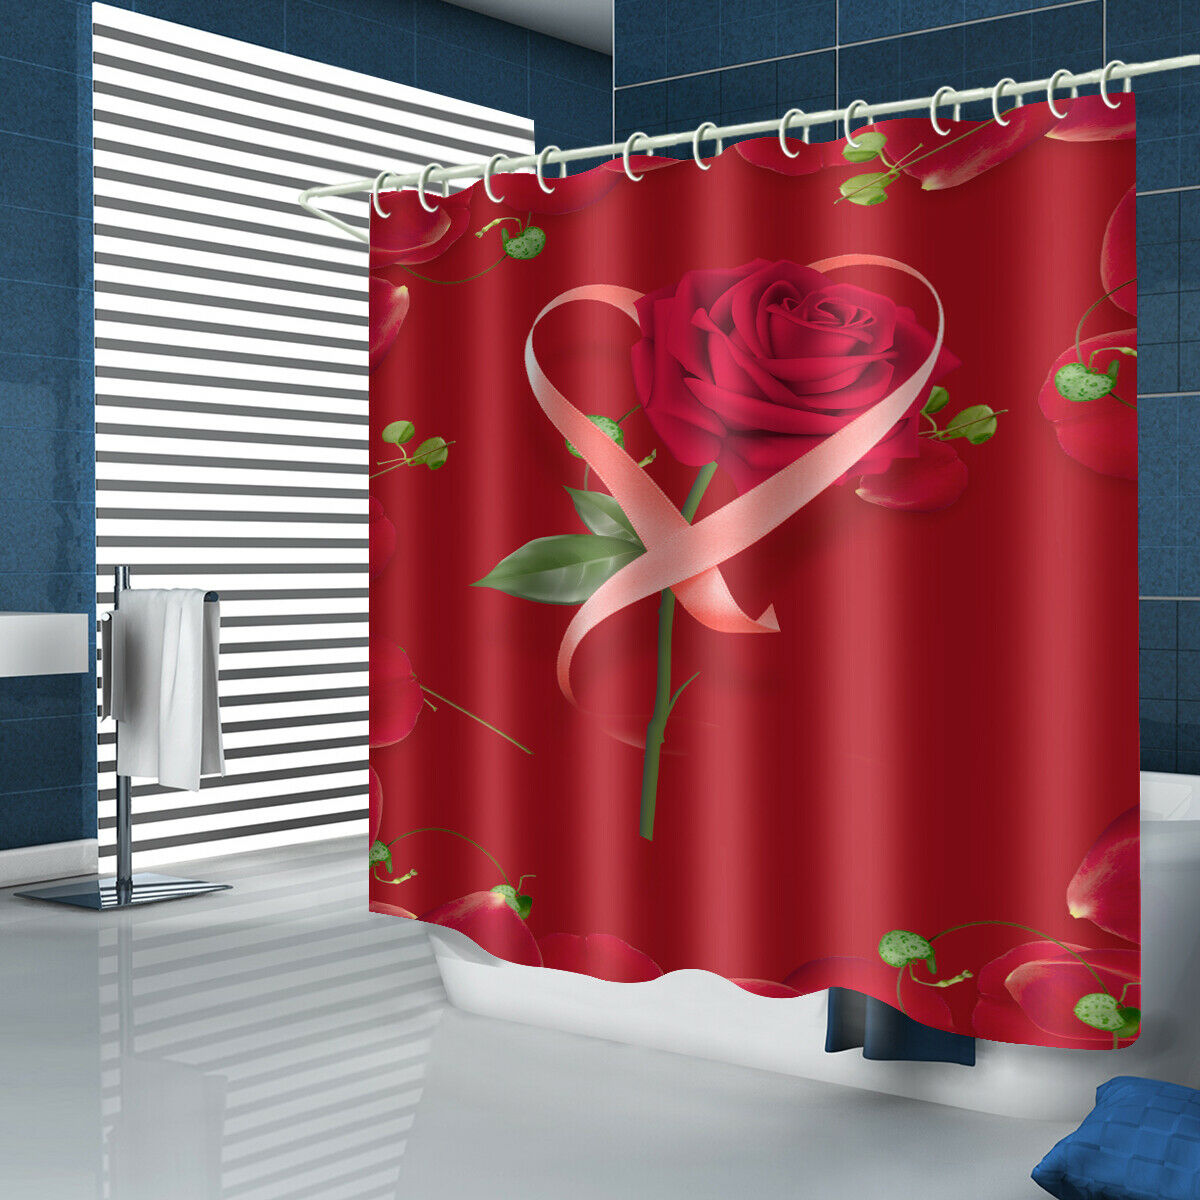 Rose Shower Curtain Bathroom Rug Set Thick Bath Mat Non-Slip Toilet Lid Cover-180×180cm Shower Curtain Only-Free Shipping at meselling99